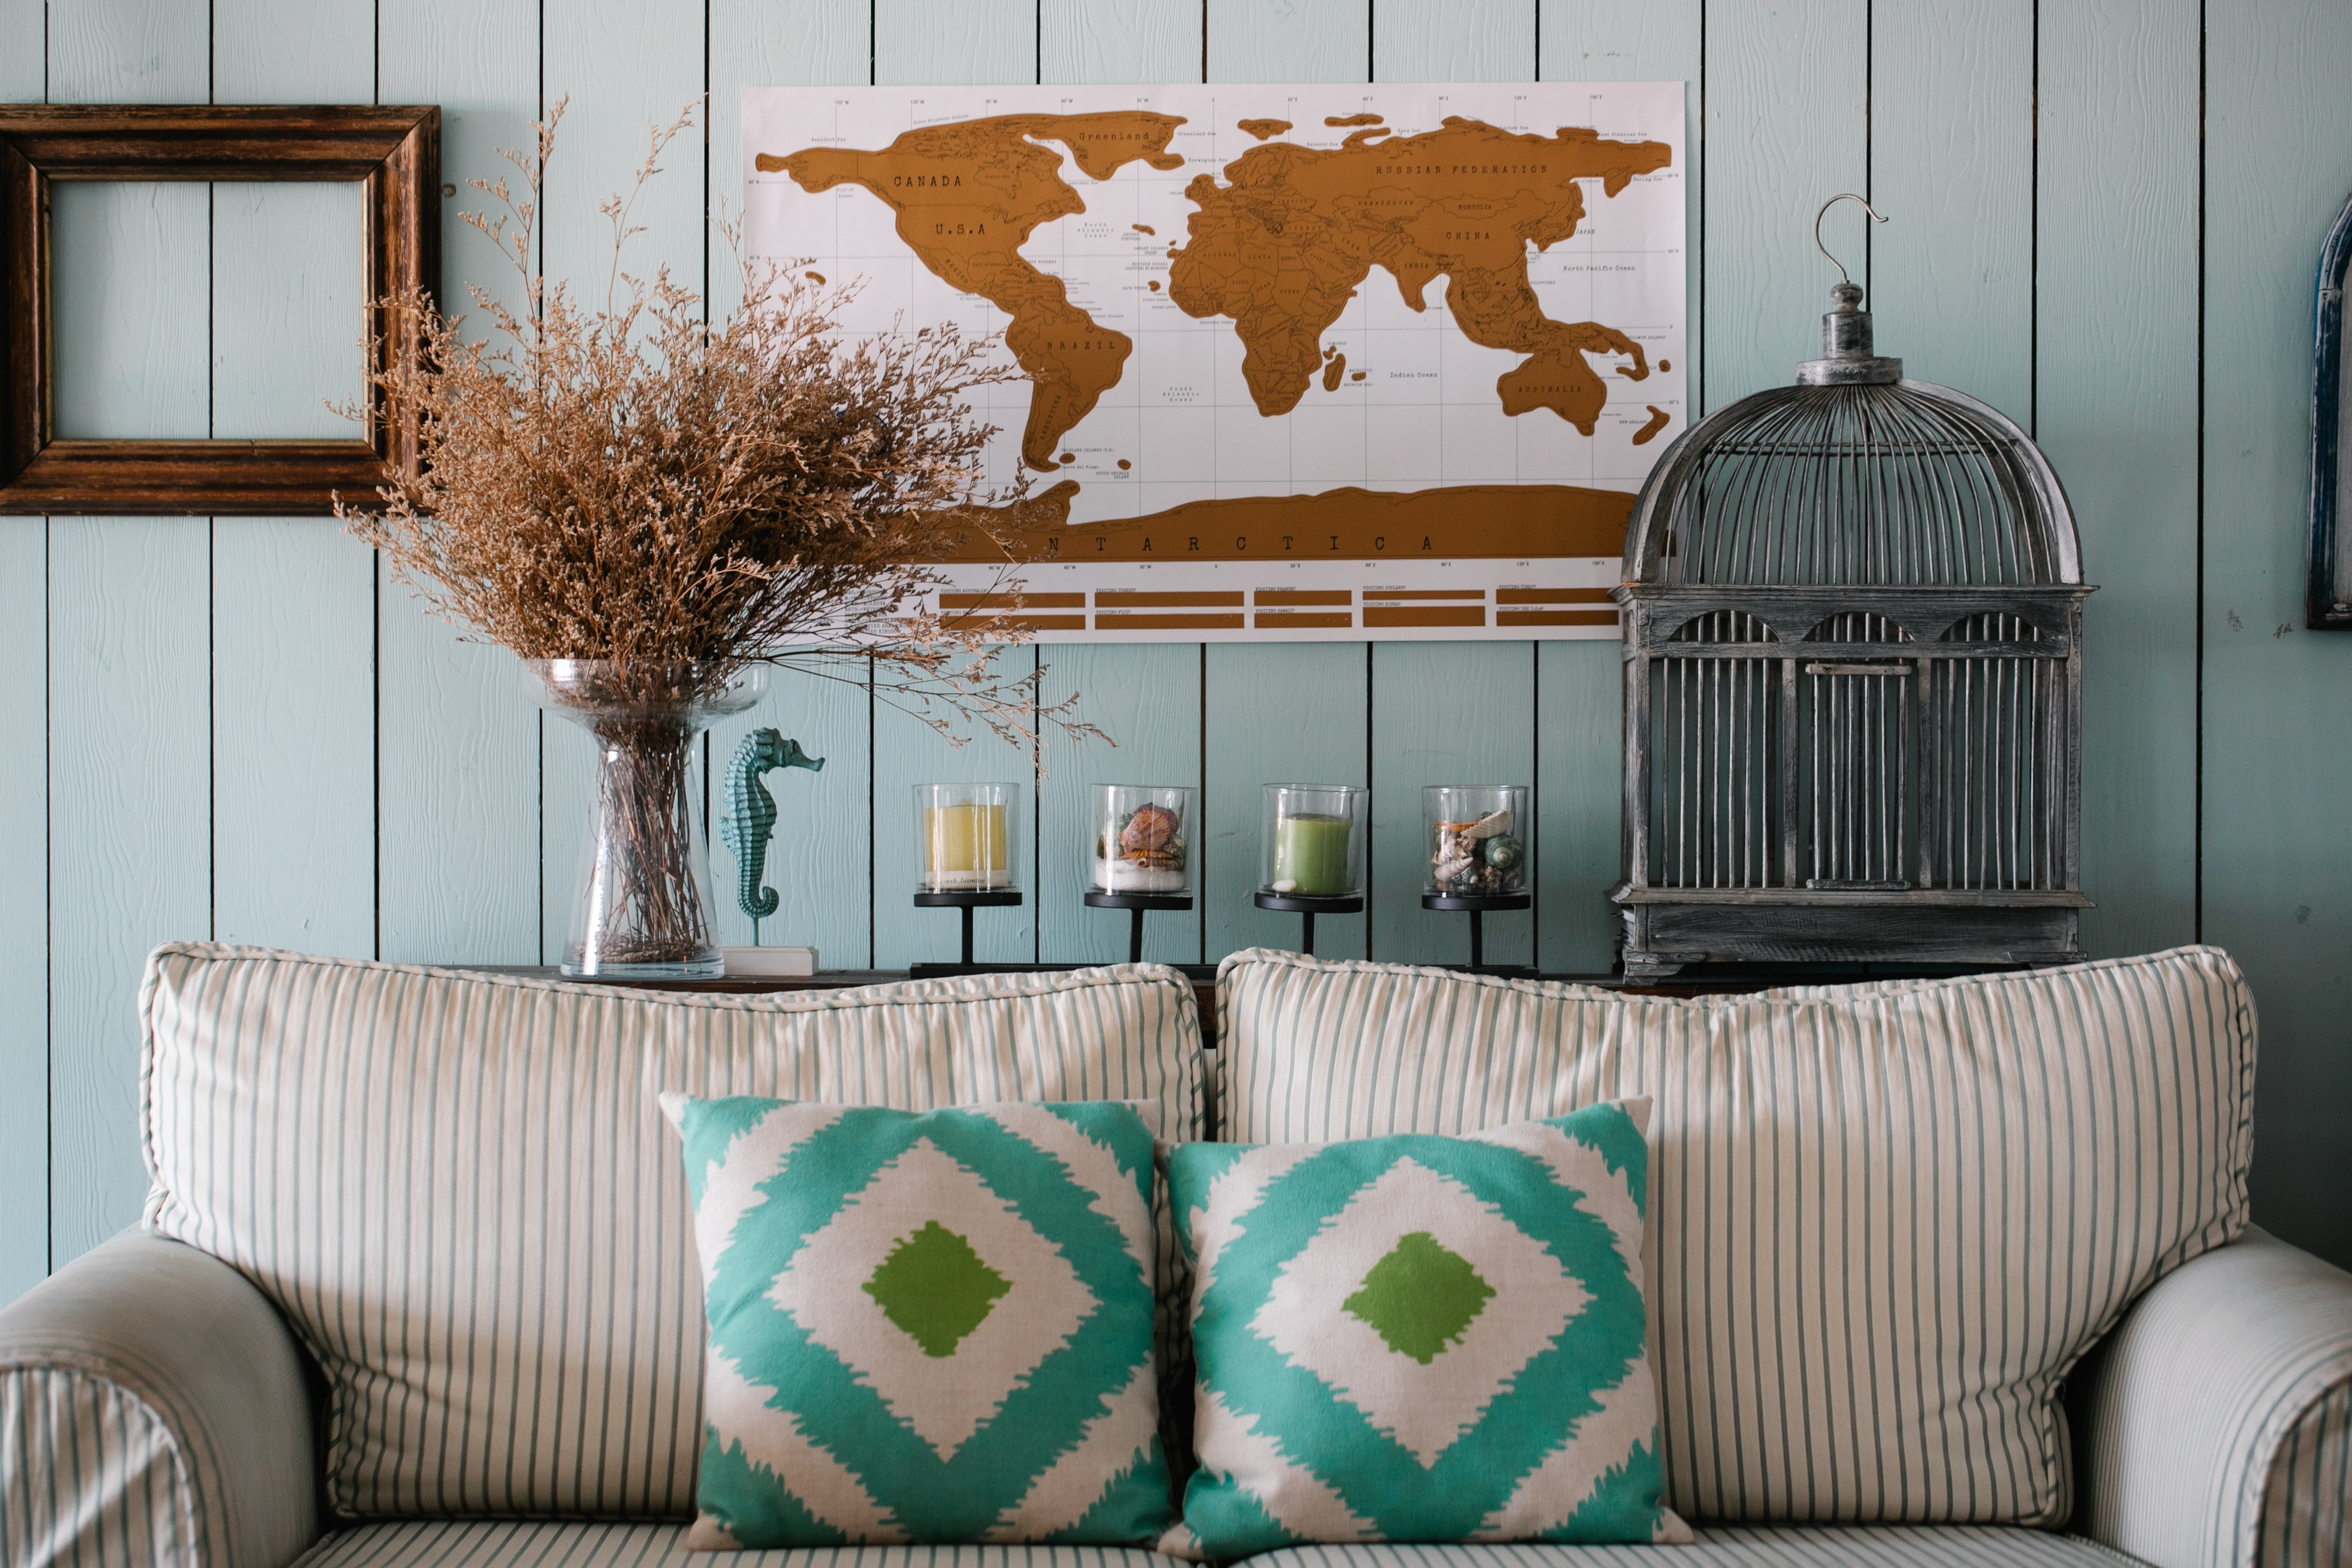 white and green striped sofa with bird cage and wall map decor